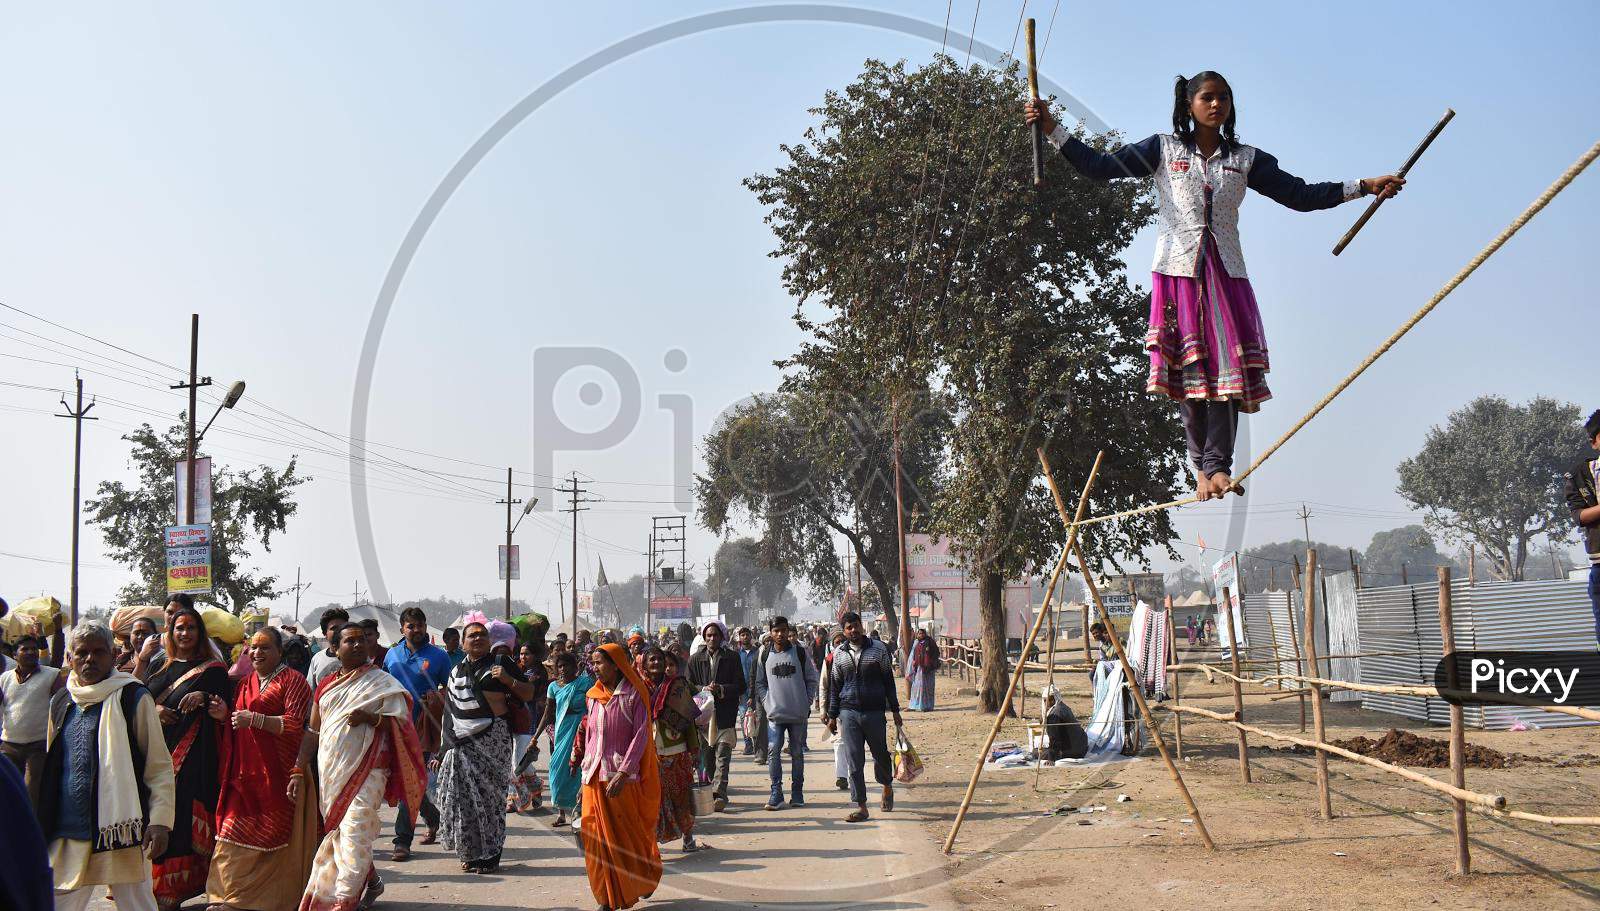 A Girl Walking on Thread At A Road Show Or Act